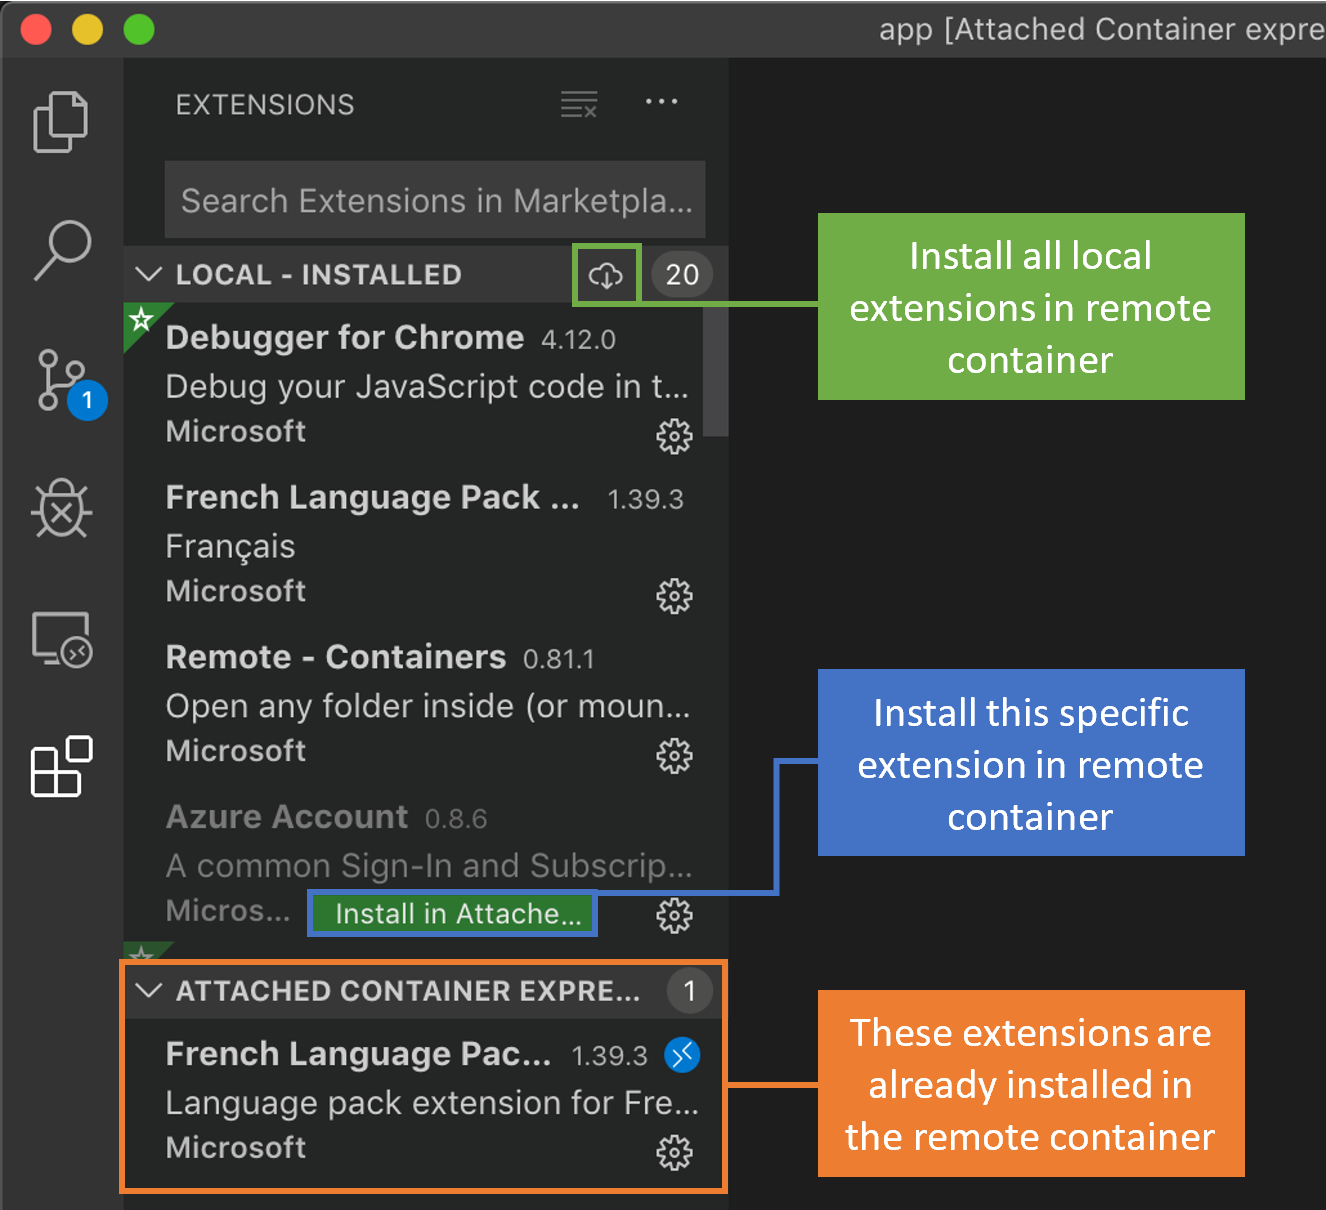 Remote Extensions view